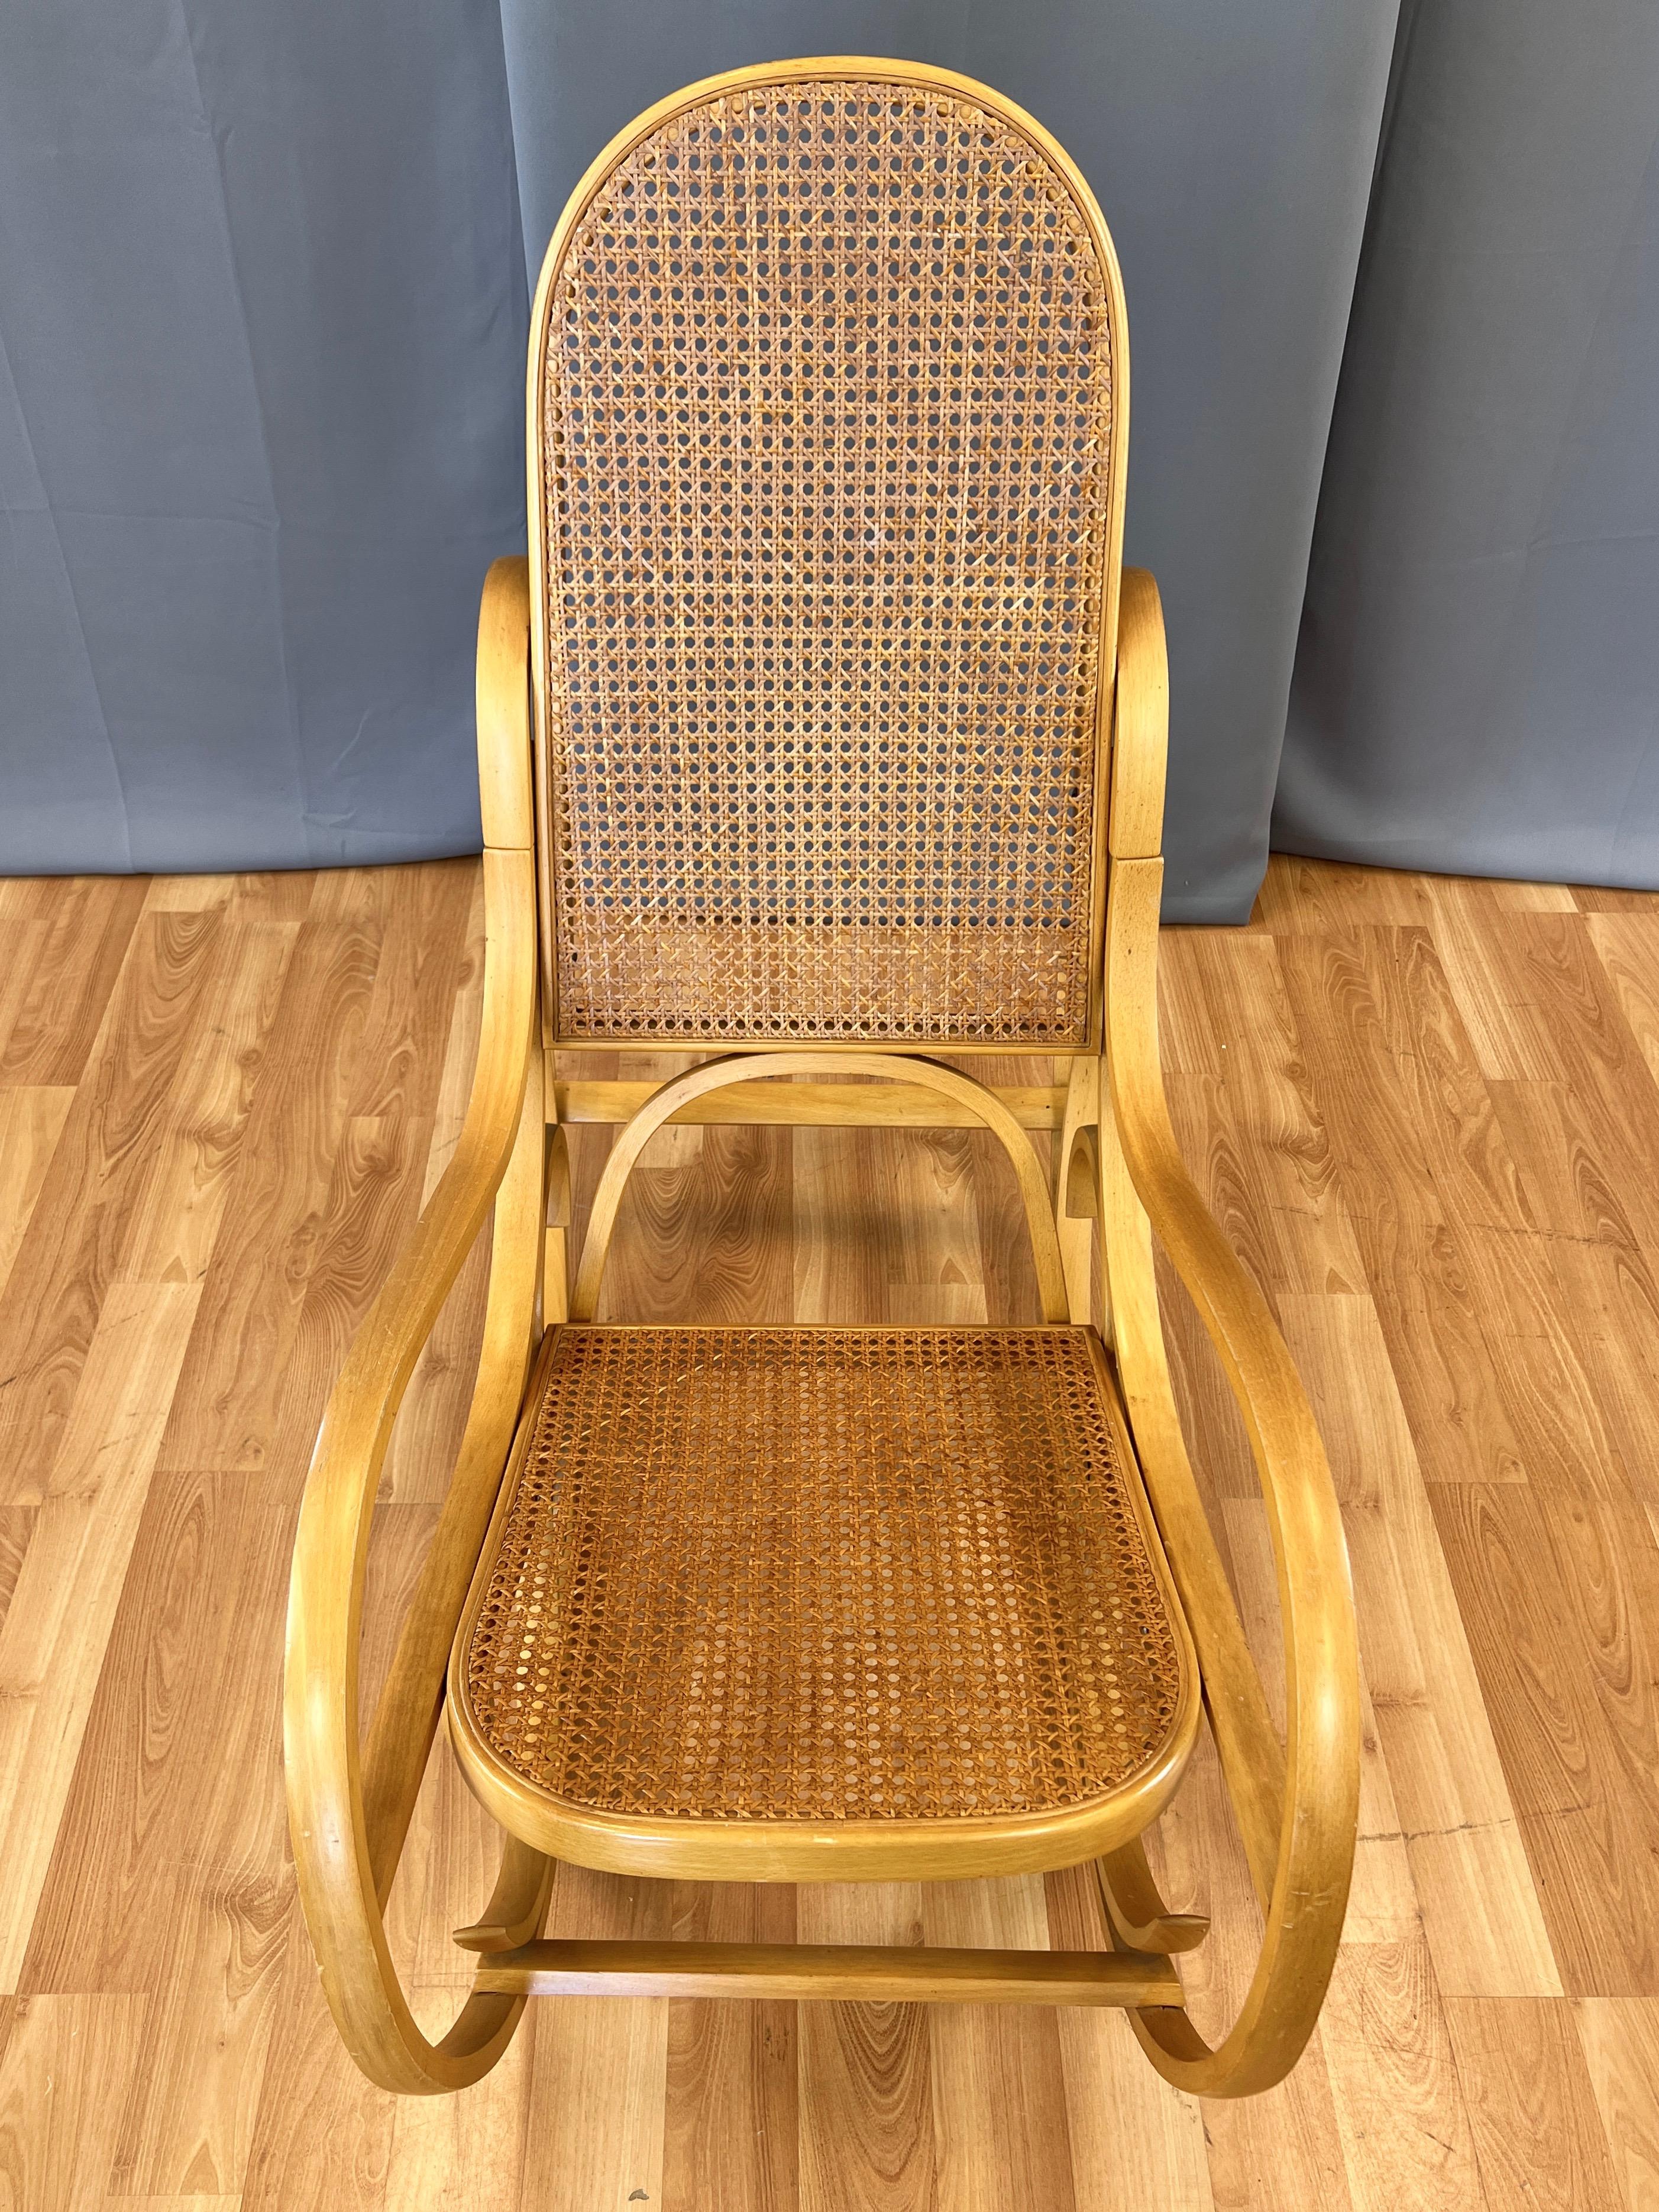 Luigi Crassevig Italian Bentwood Rocking Chair with Woven Cane Seat, 1970s For Sale 3